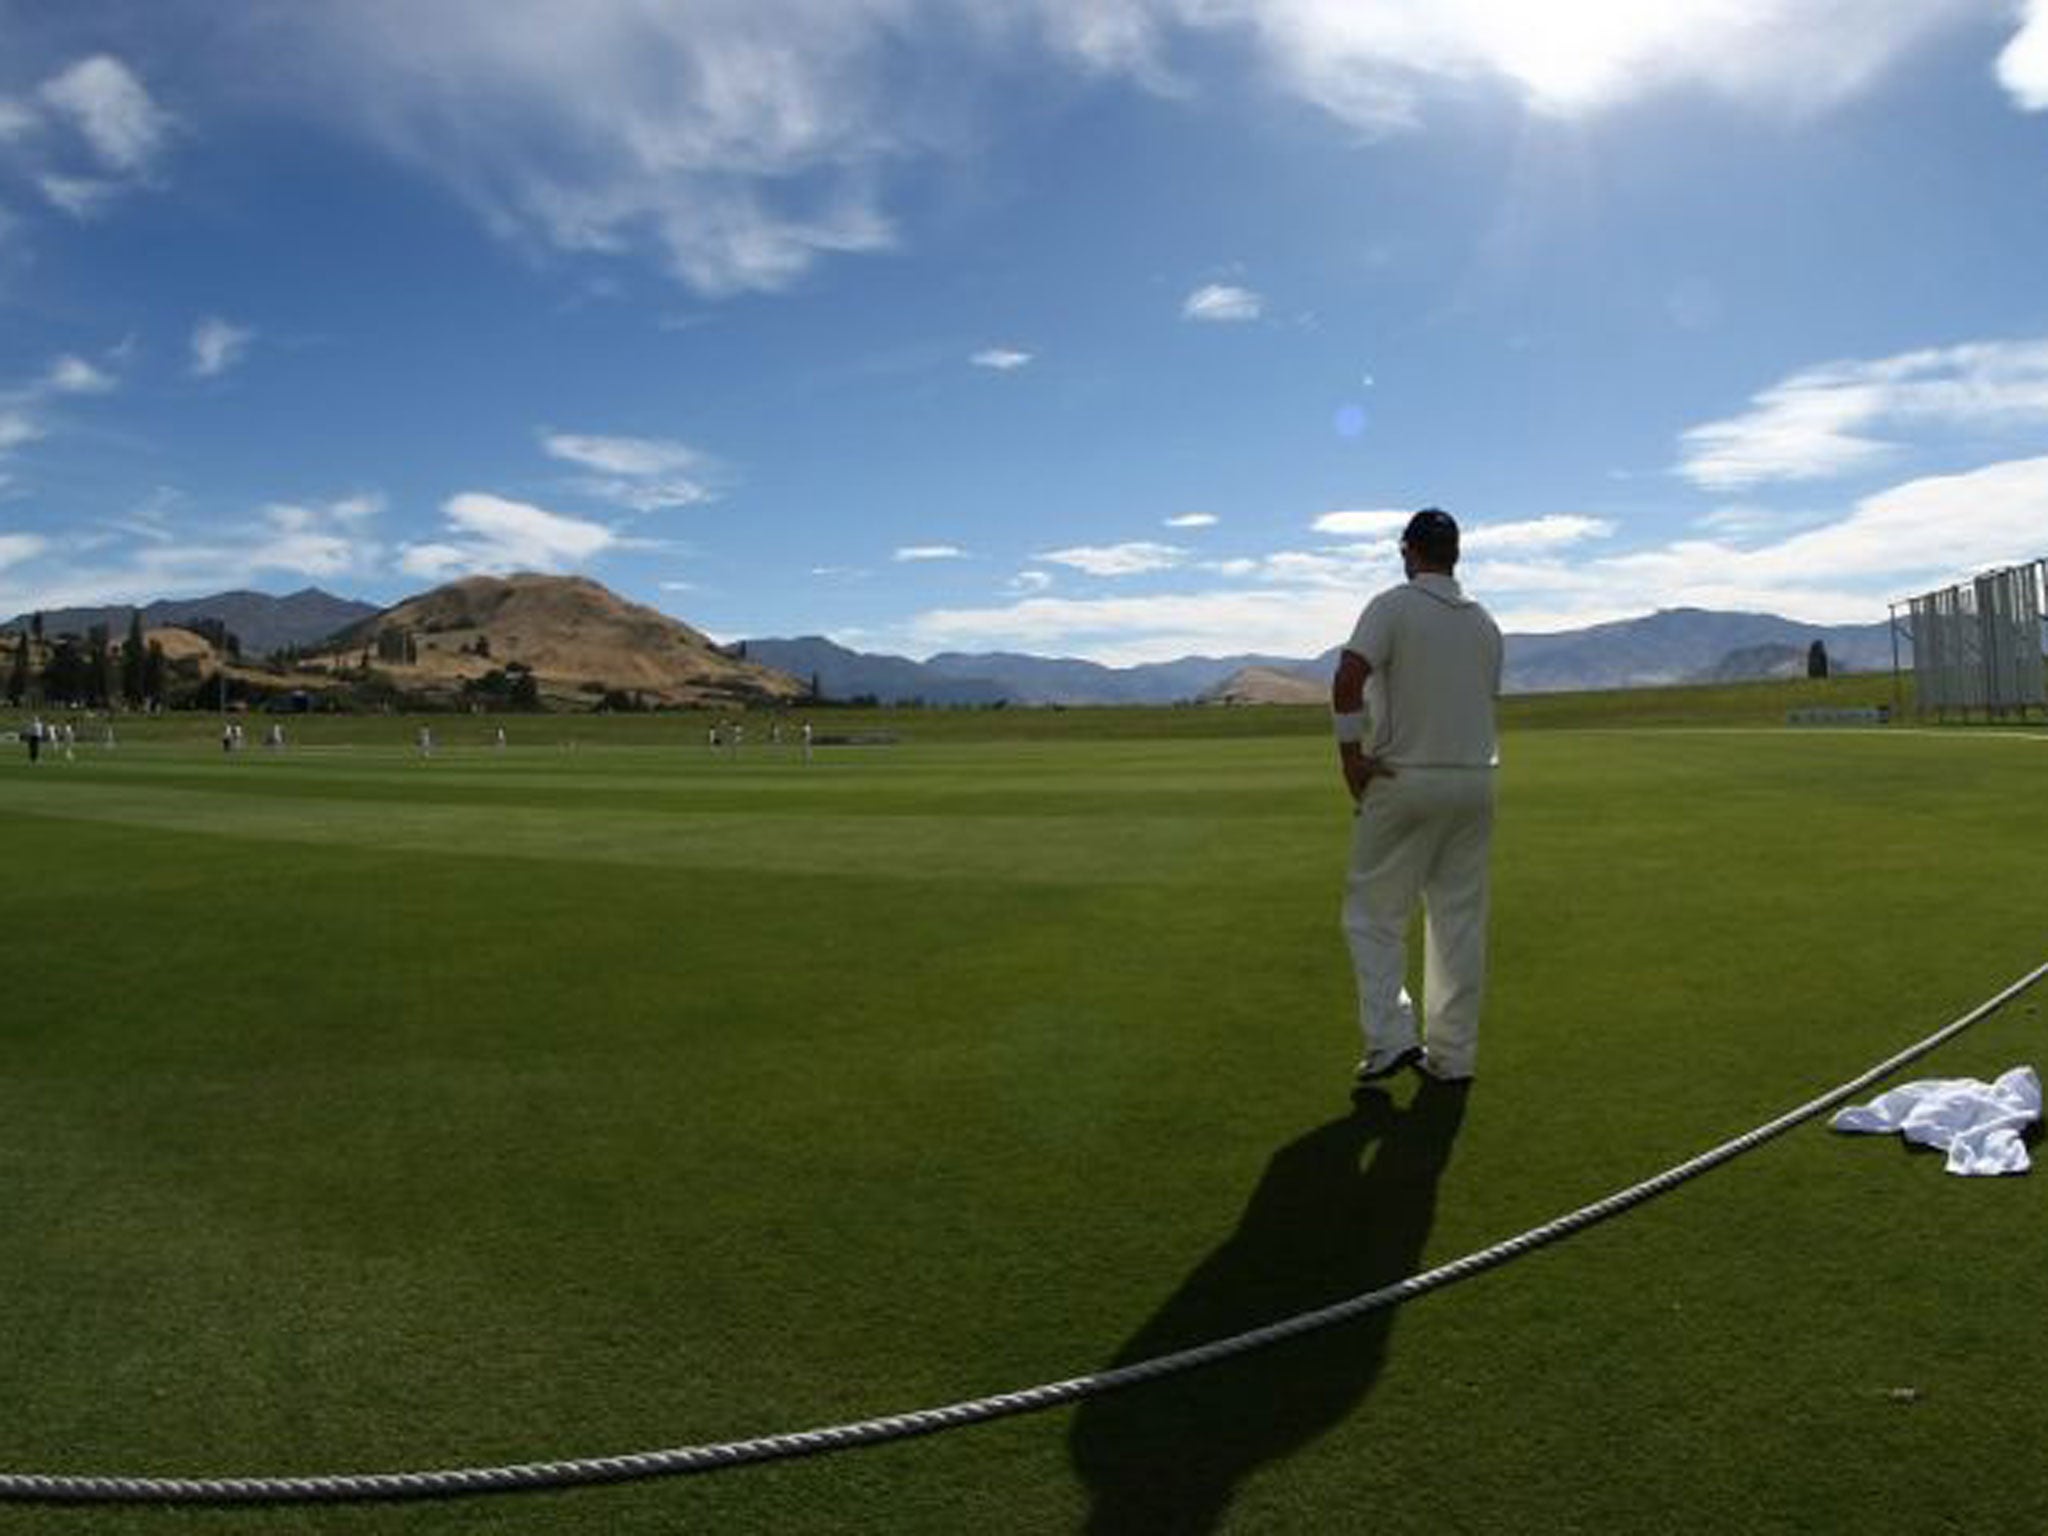 New Zealand XI’s Mark Gillespie looks on during England’s tour match in Queenstown